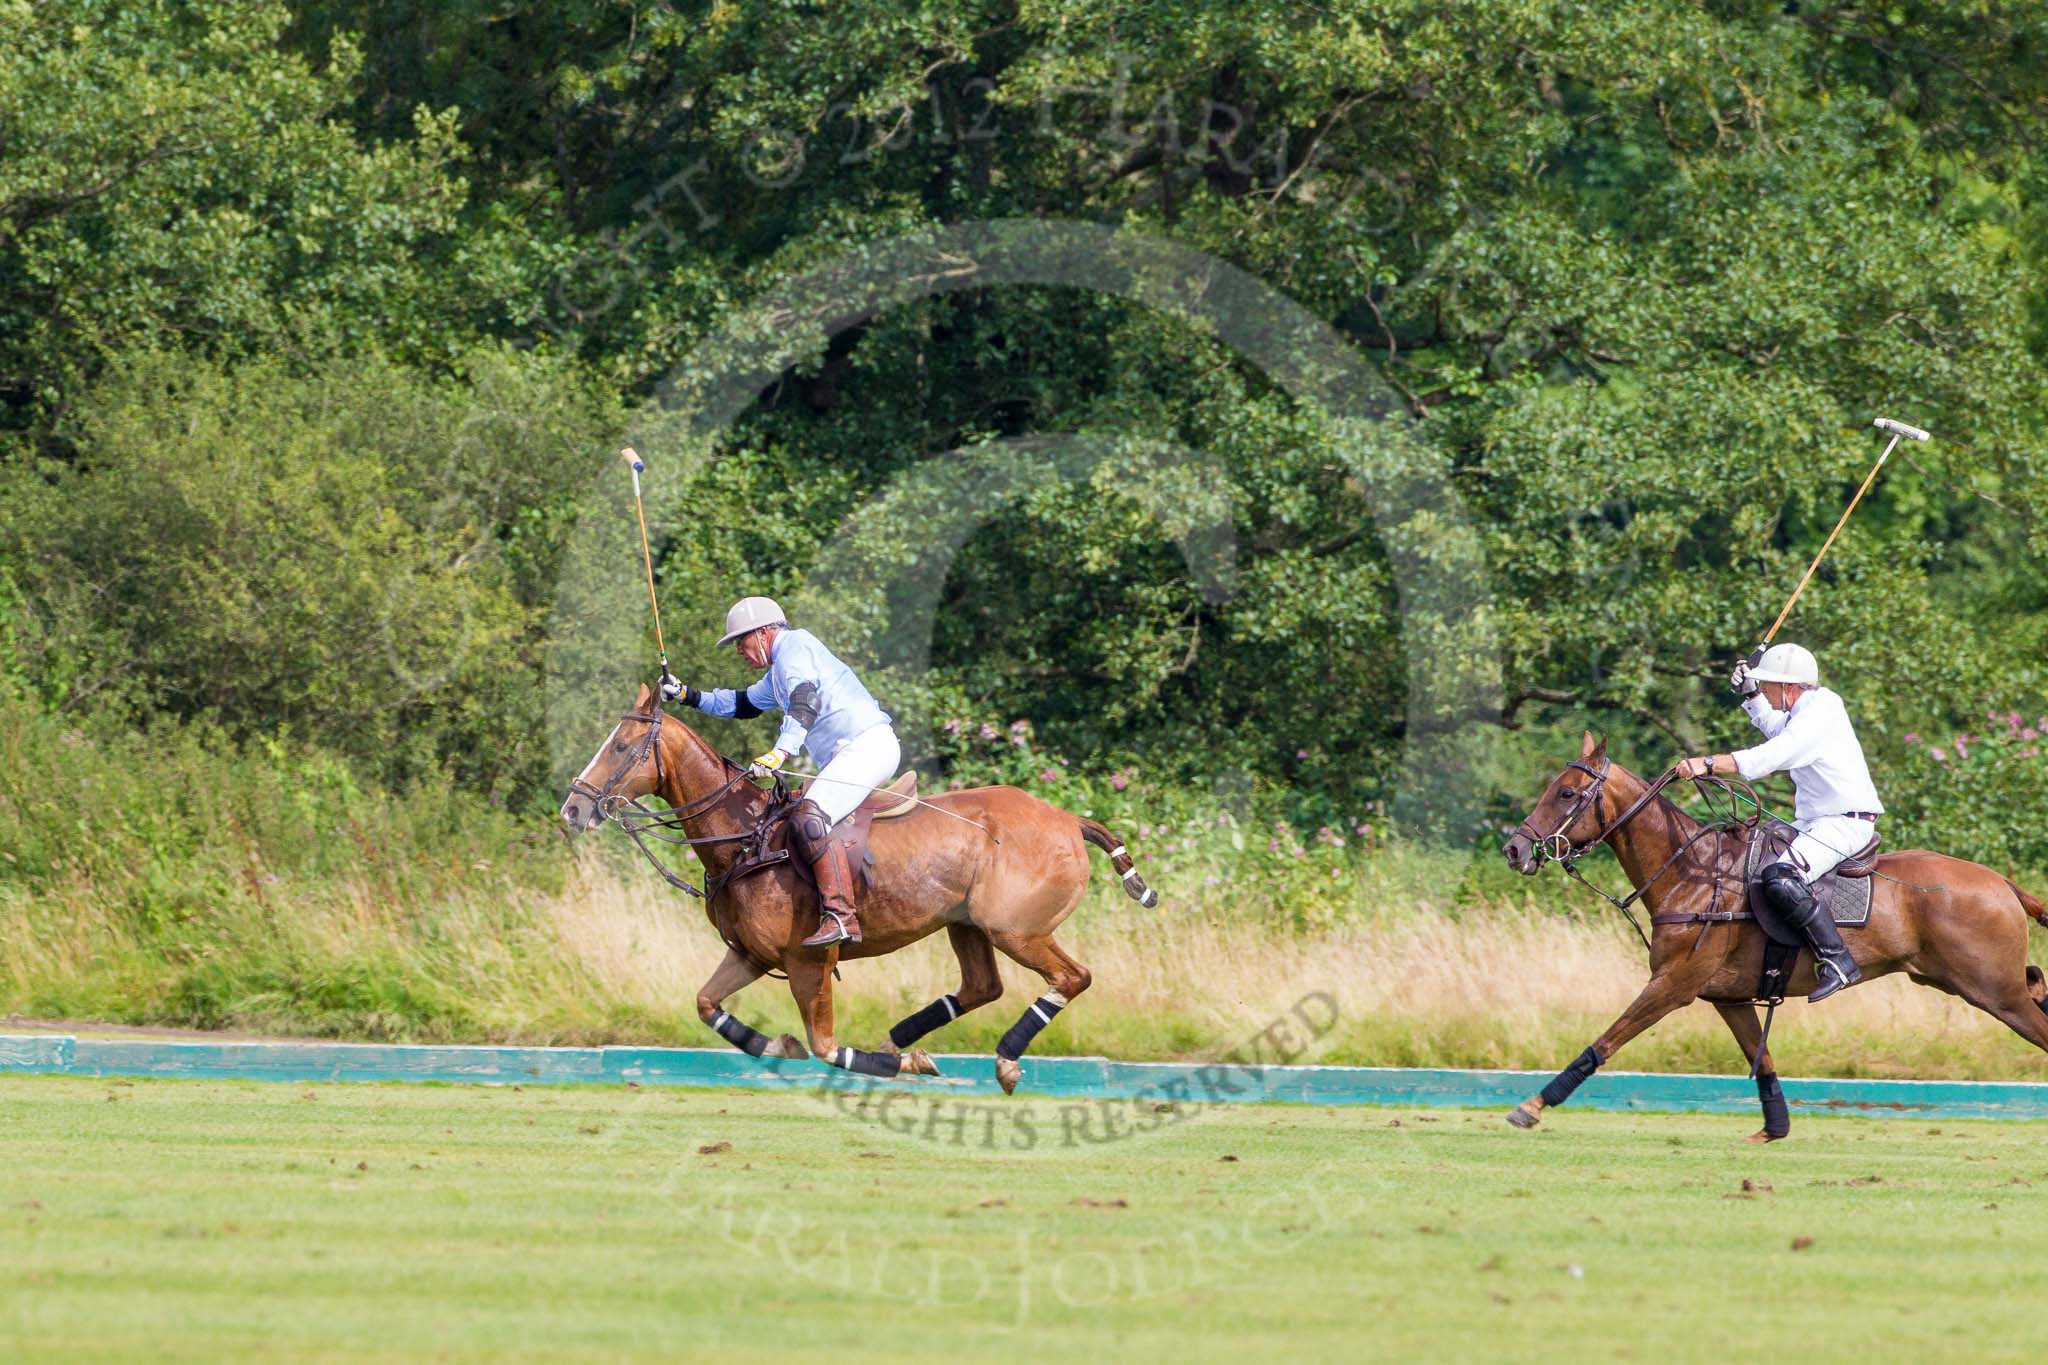 7th Heritage Polo Cup semi-finals: Mariano Darritchon braking away followed by Paul Oberschneider..
Hurtwood Park Polo Club,
Ewhurst Green,
Surrey,
United Kingdom,
on 04 August 2012 at 16:17, image #325